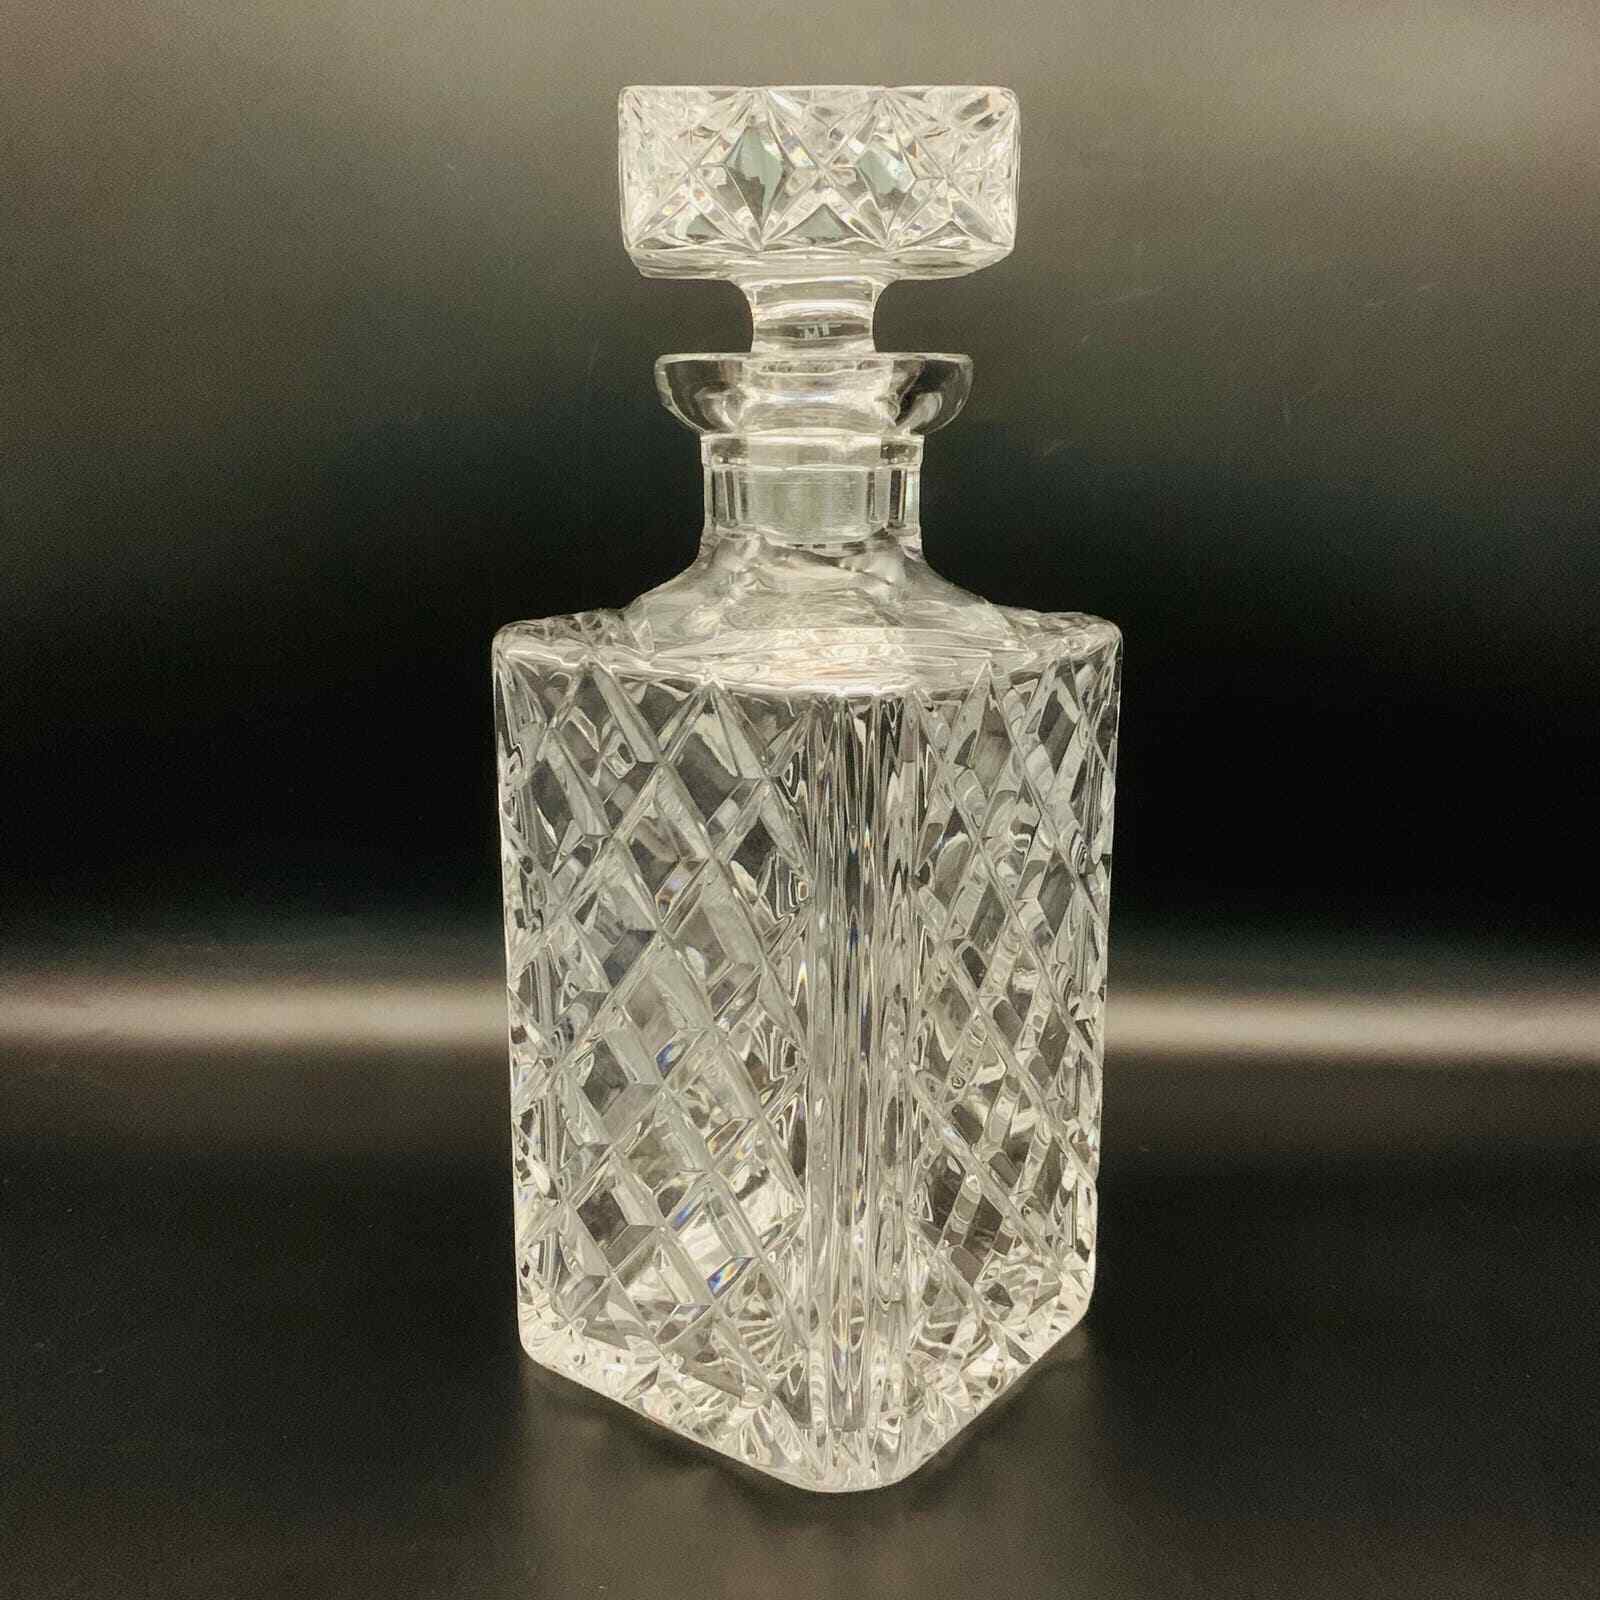 Vintage Nachtmann 9.5” Crystal Cut Glass Decanter with Stopper